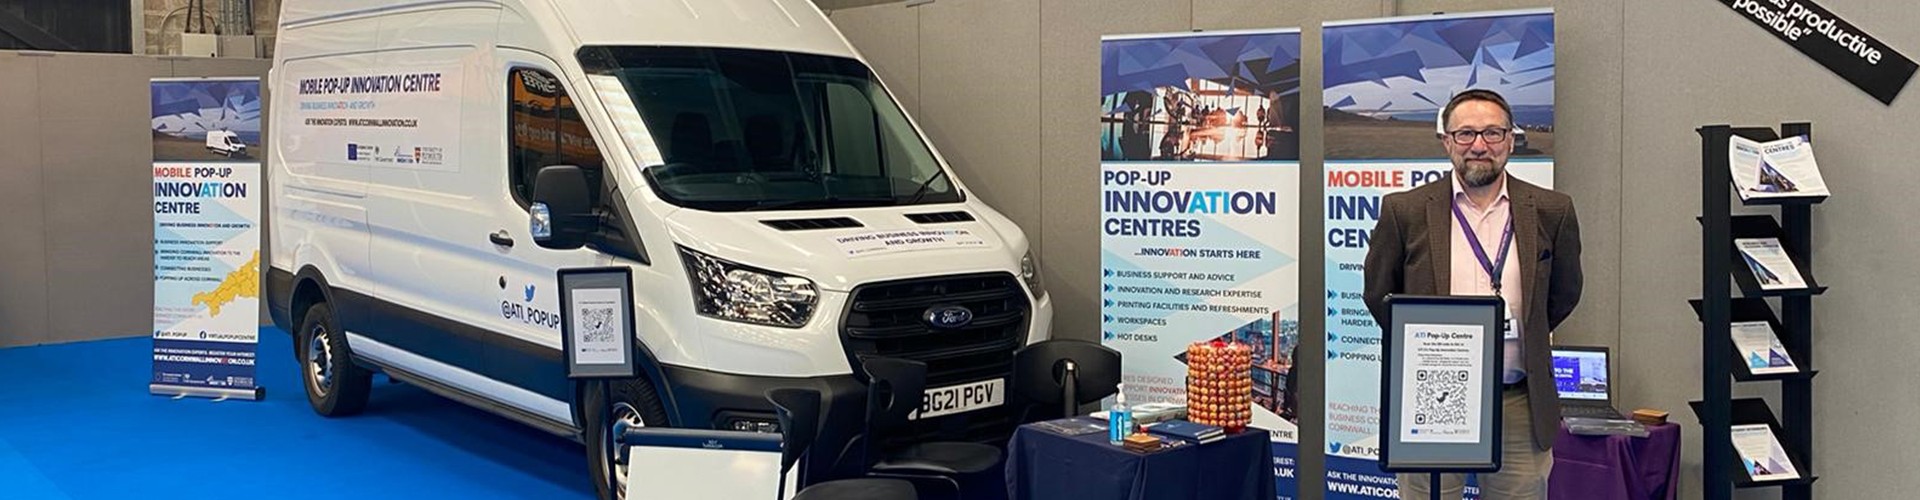 Van and person at Cornwall Business Show